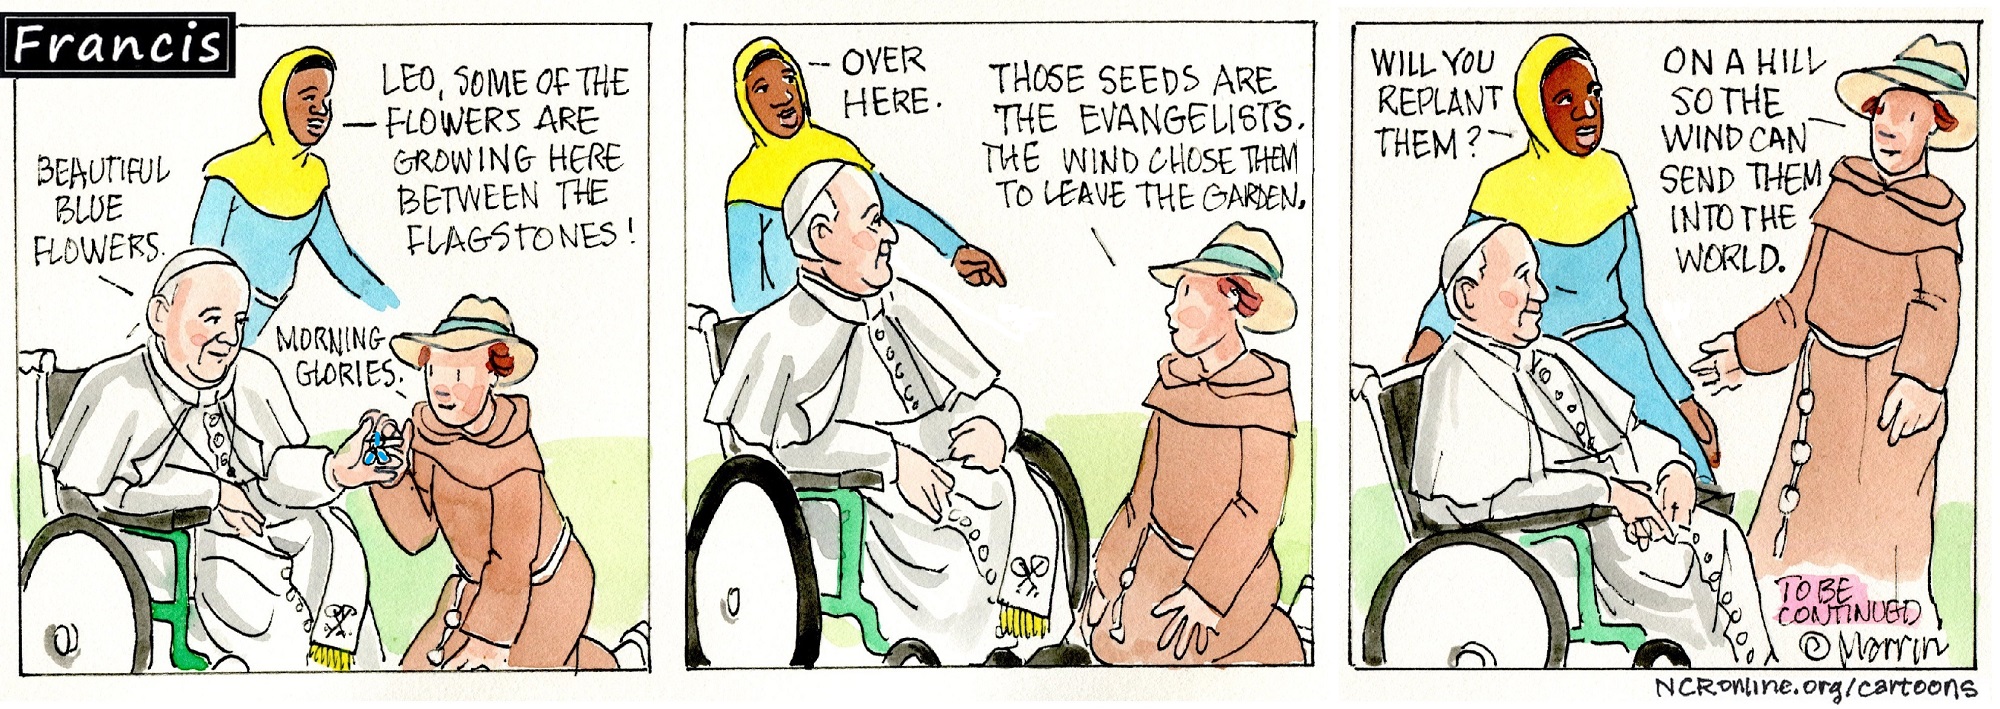 Francis, the comic strip: Brother Leo plants seeds of evangelism to go out into the world.